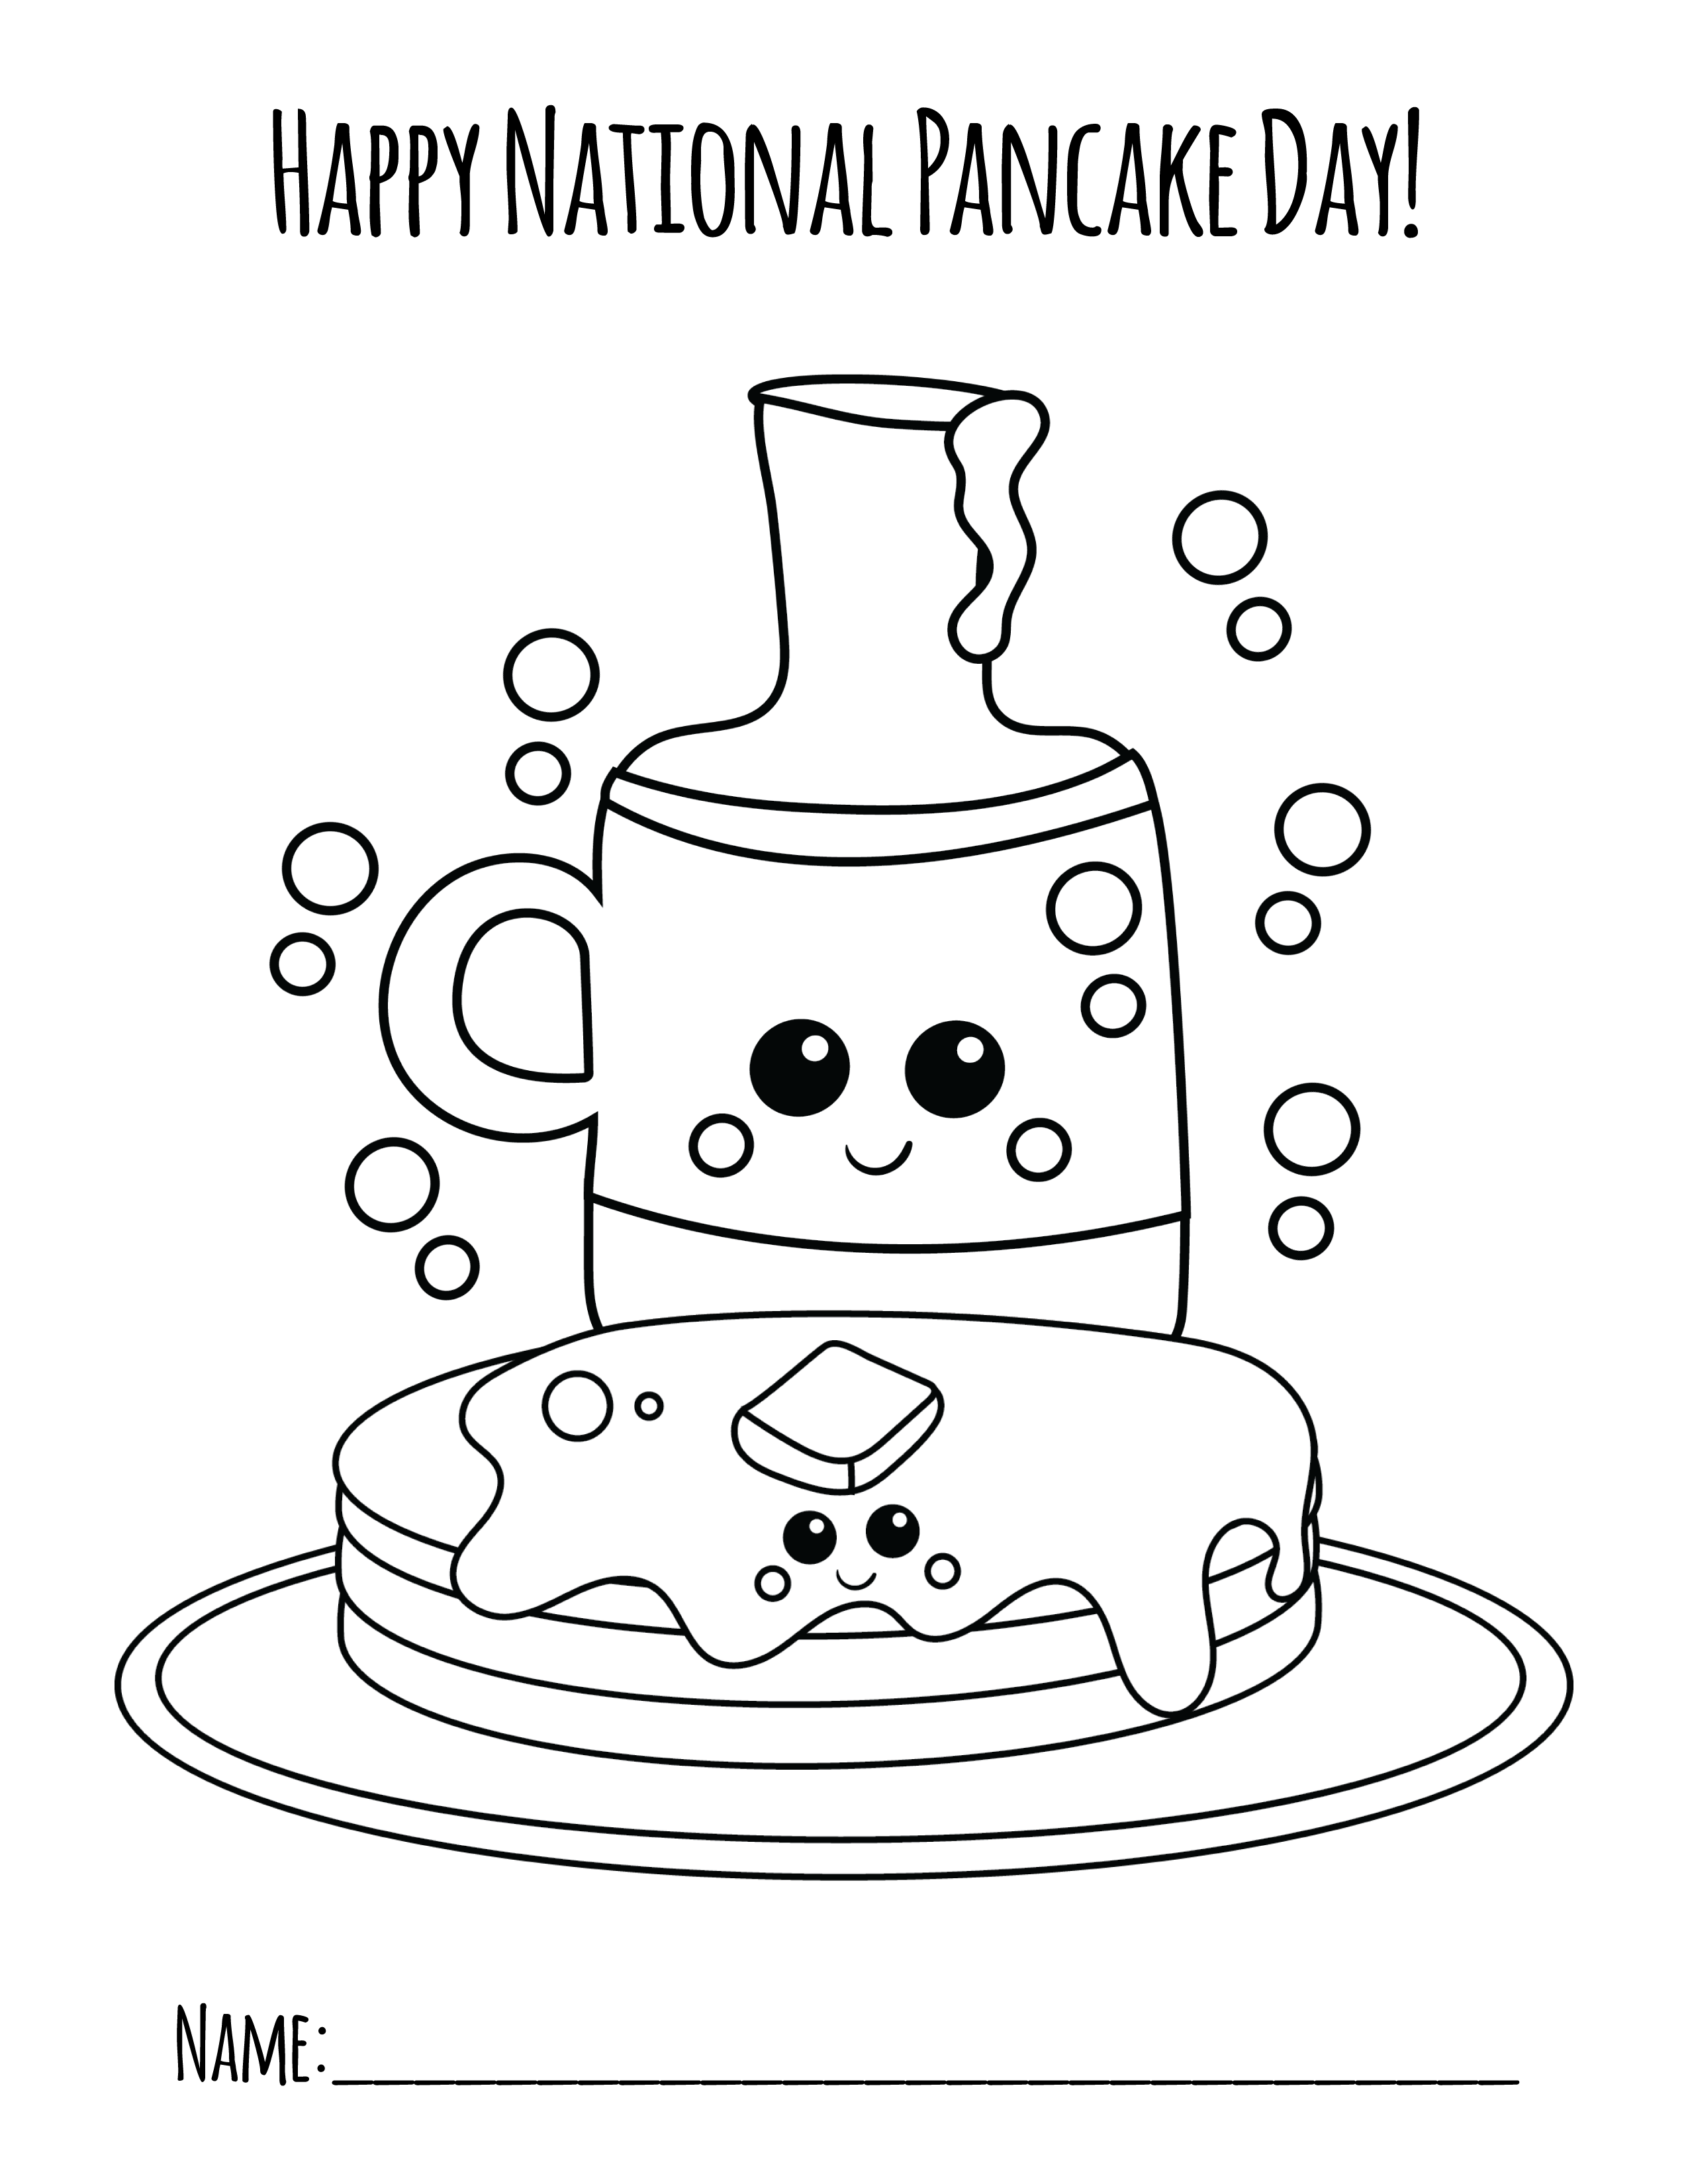 National Pancake Day Coloring Page ⋆ Primoparty | National pancake, Pancake  day colouring pages, Pancake day